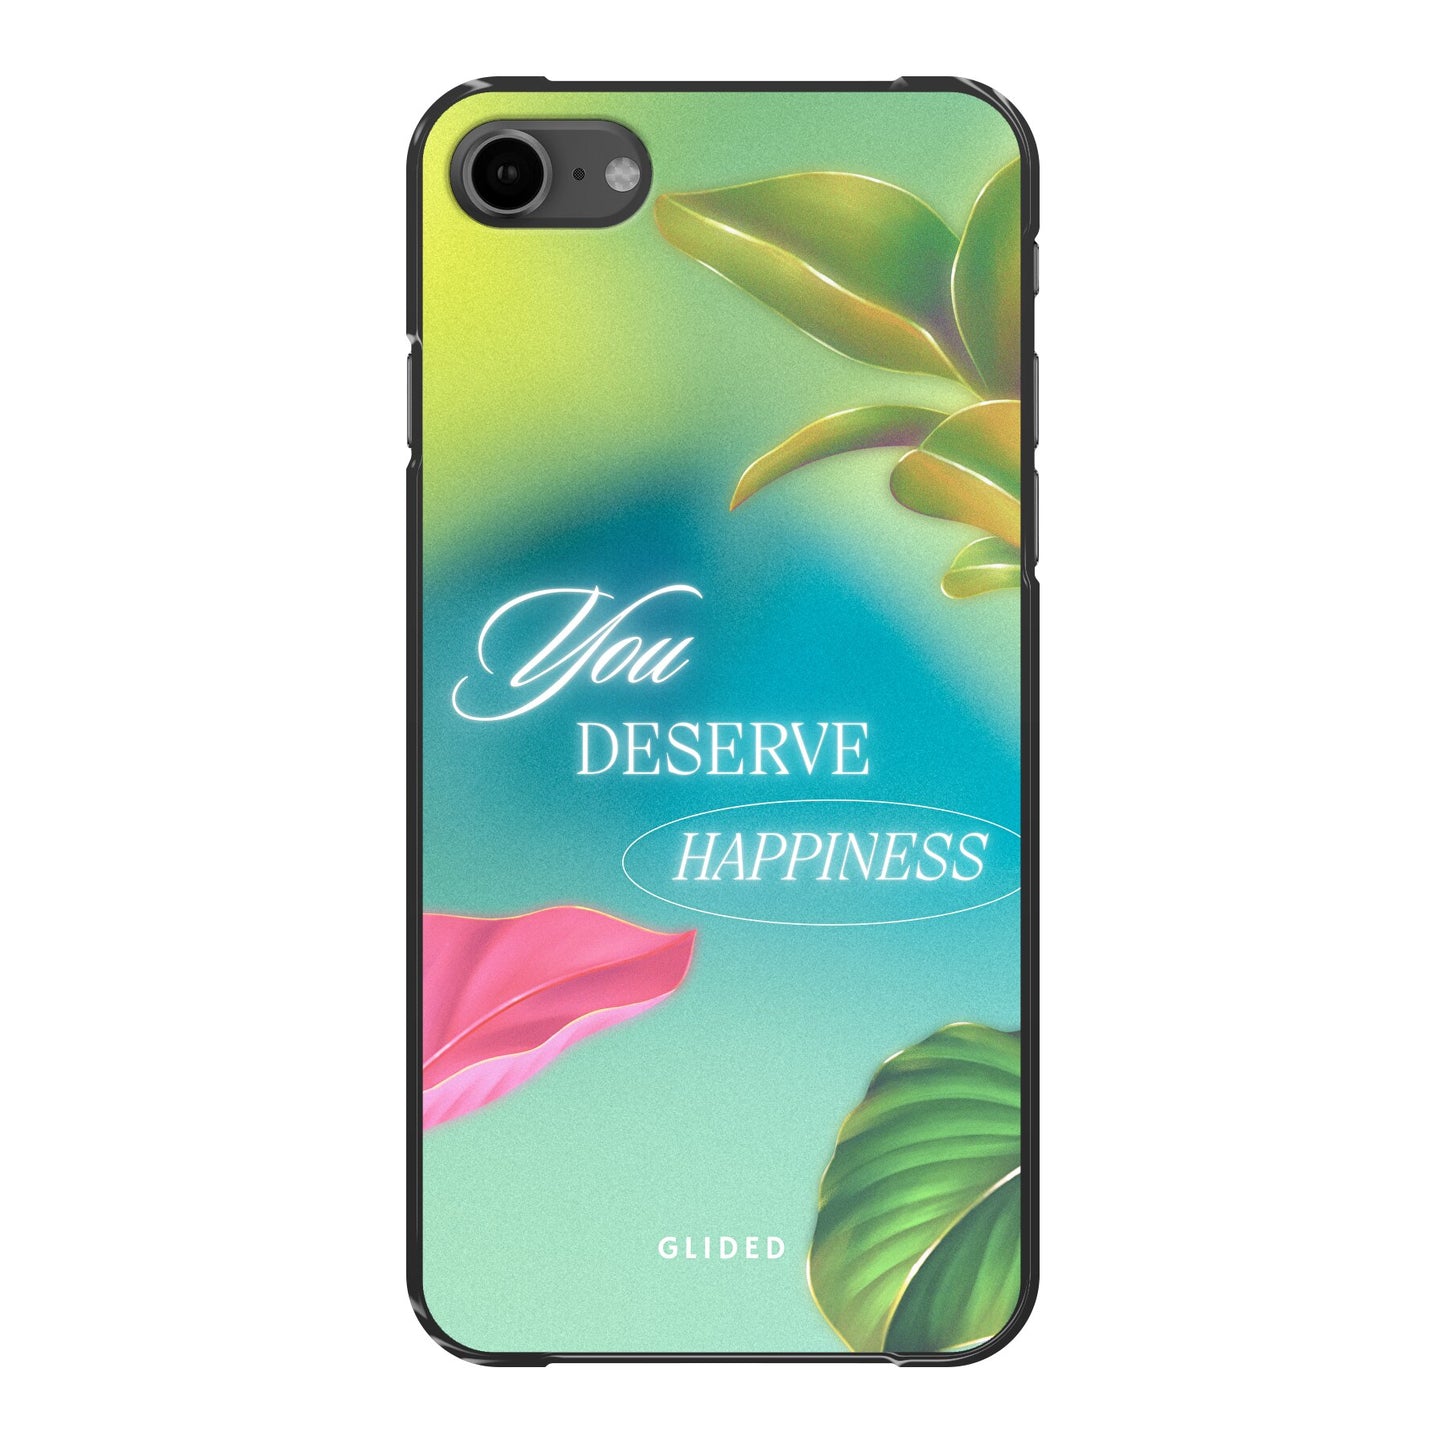 Happiness - iPhone 7 - Hard Case